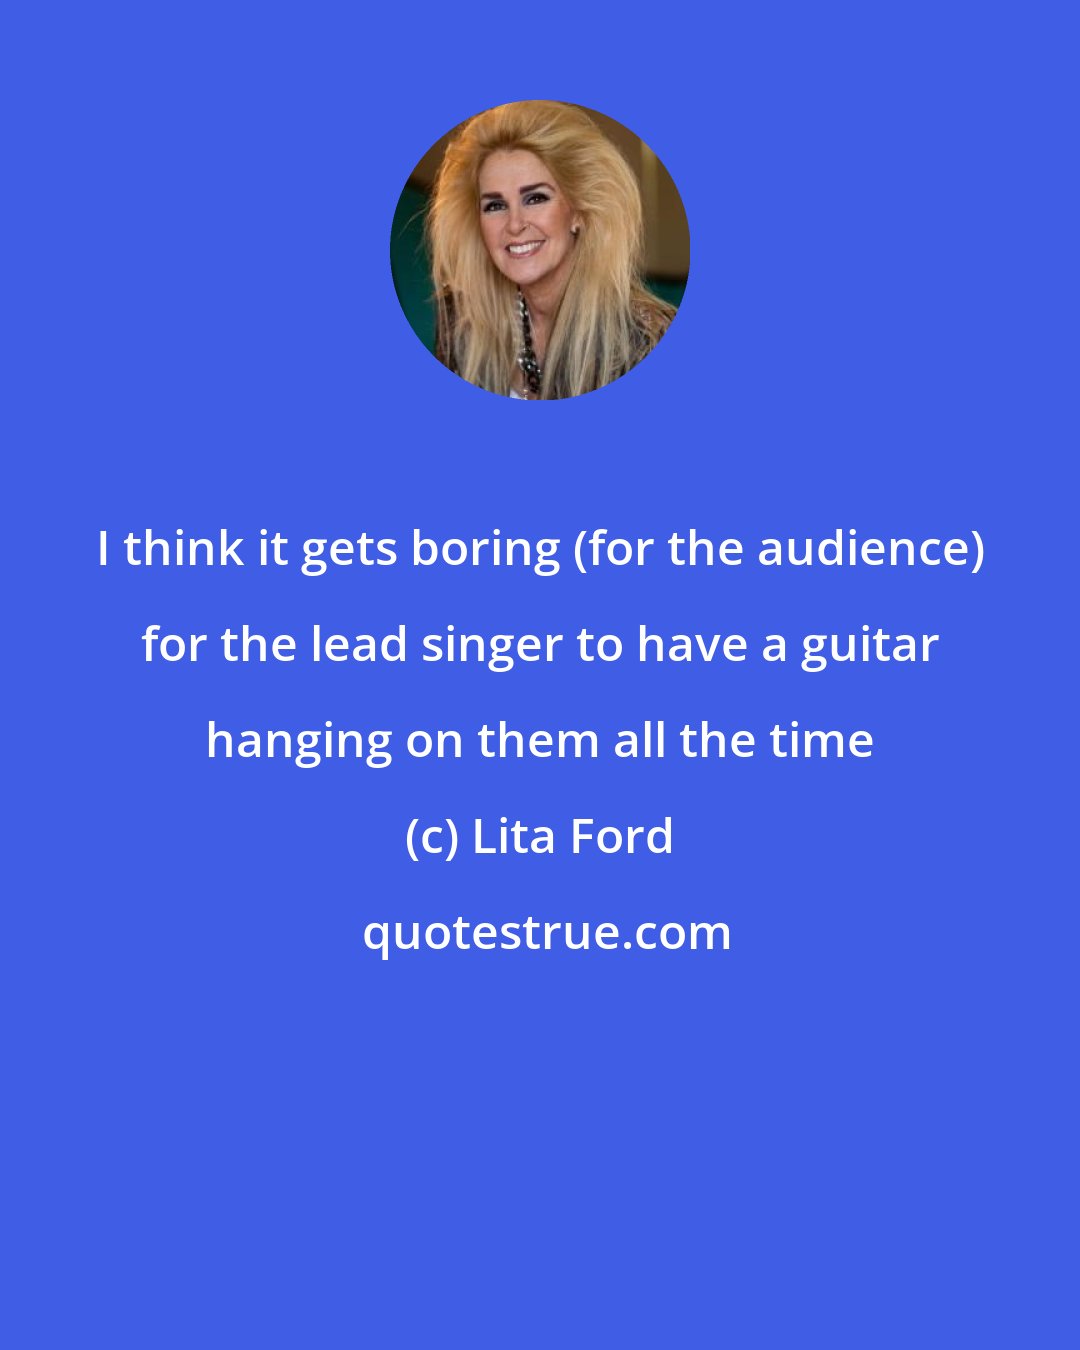 Lita Ford: I think it gets boring (for the audience) for the lead singer to have a guitar hanging on them all the time